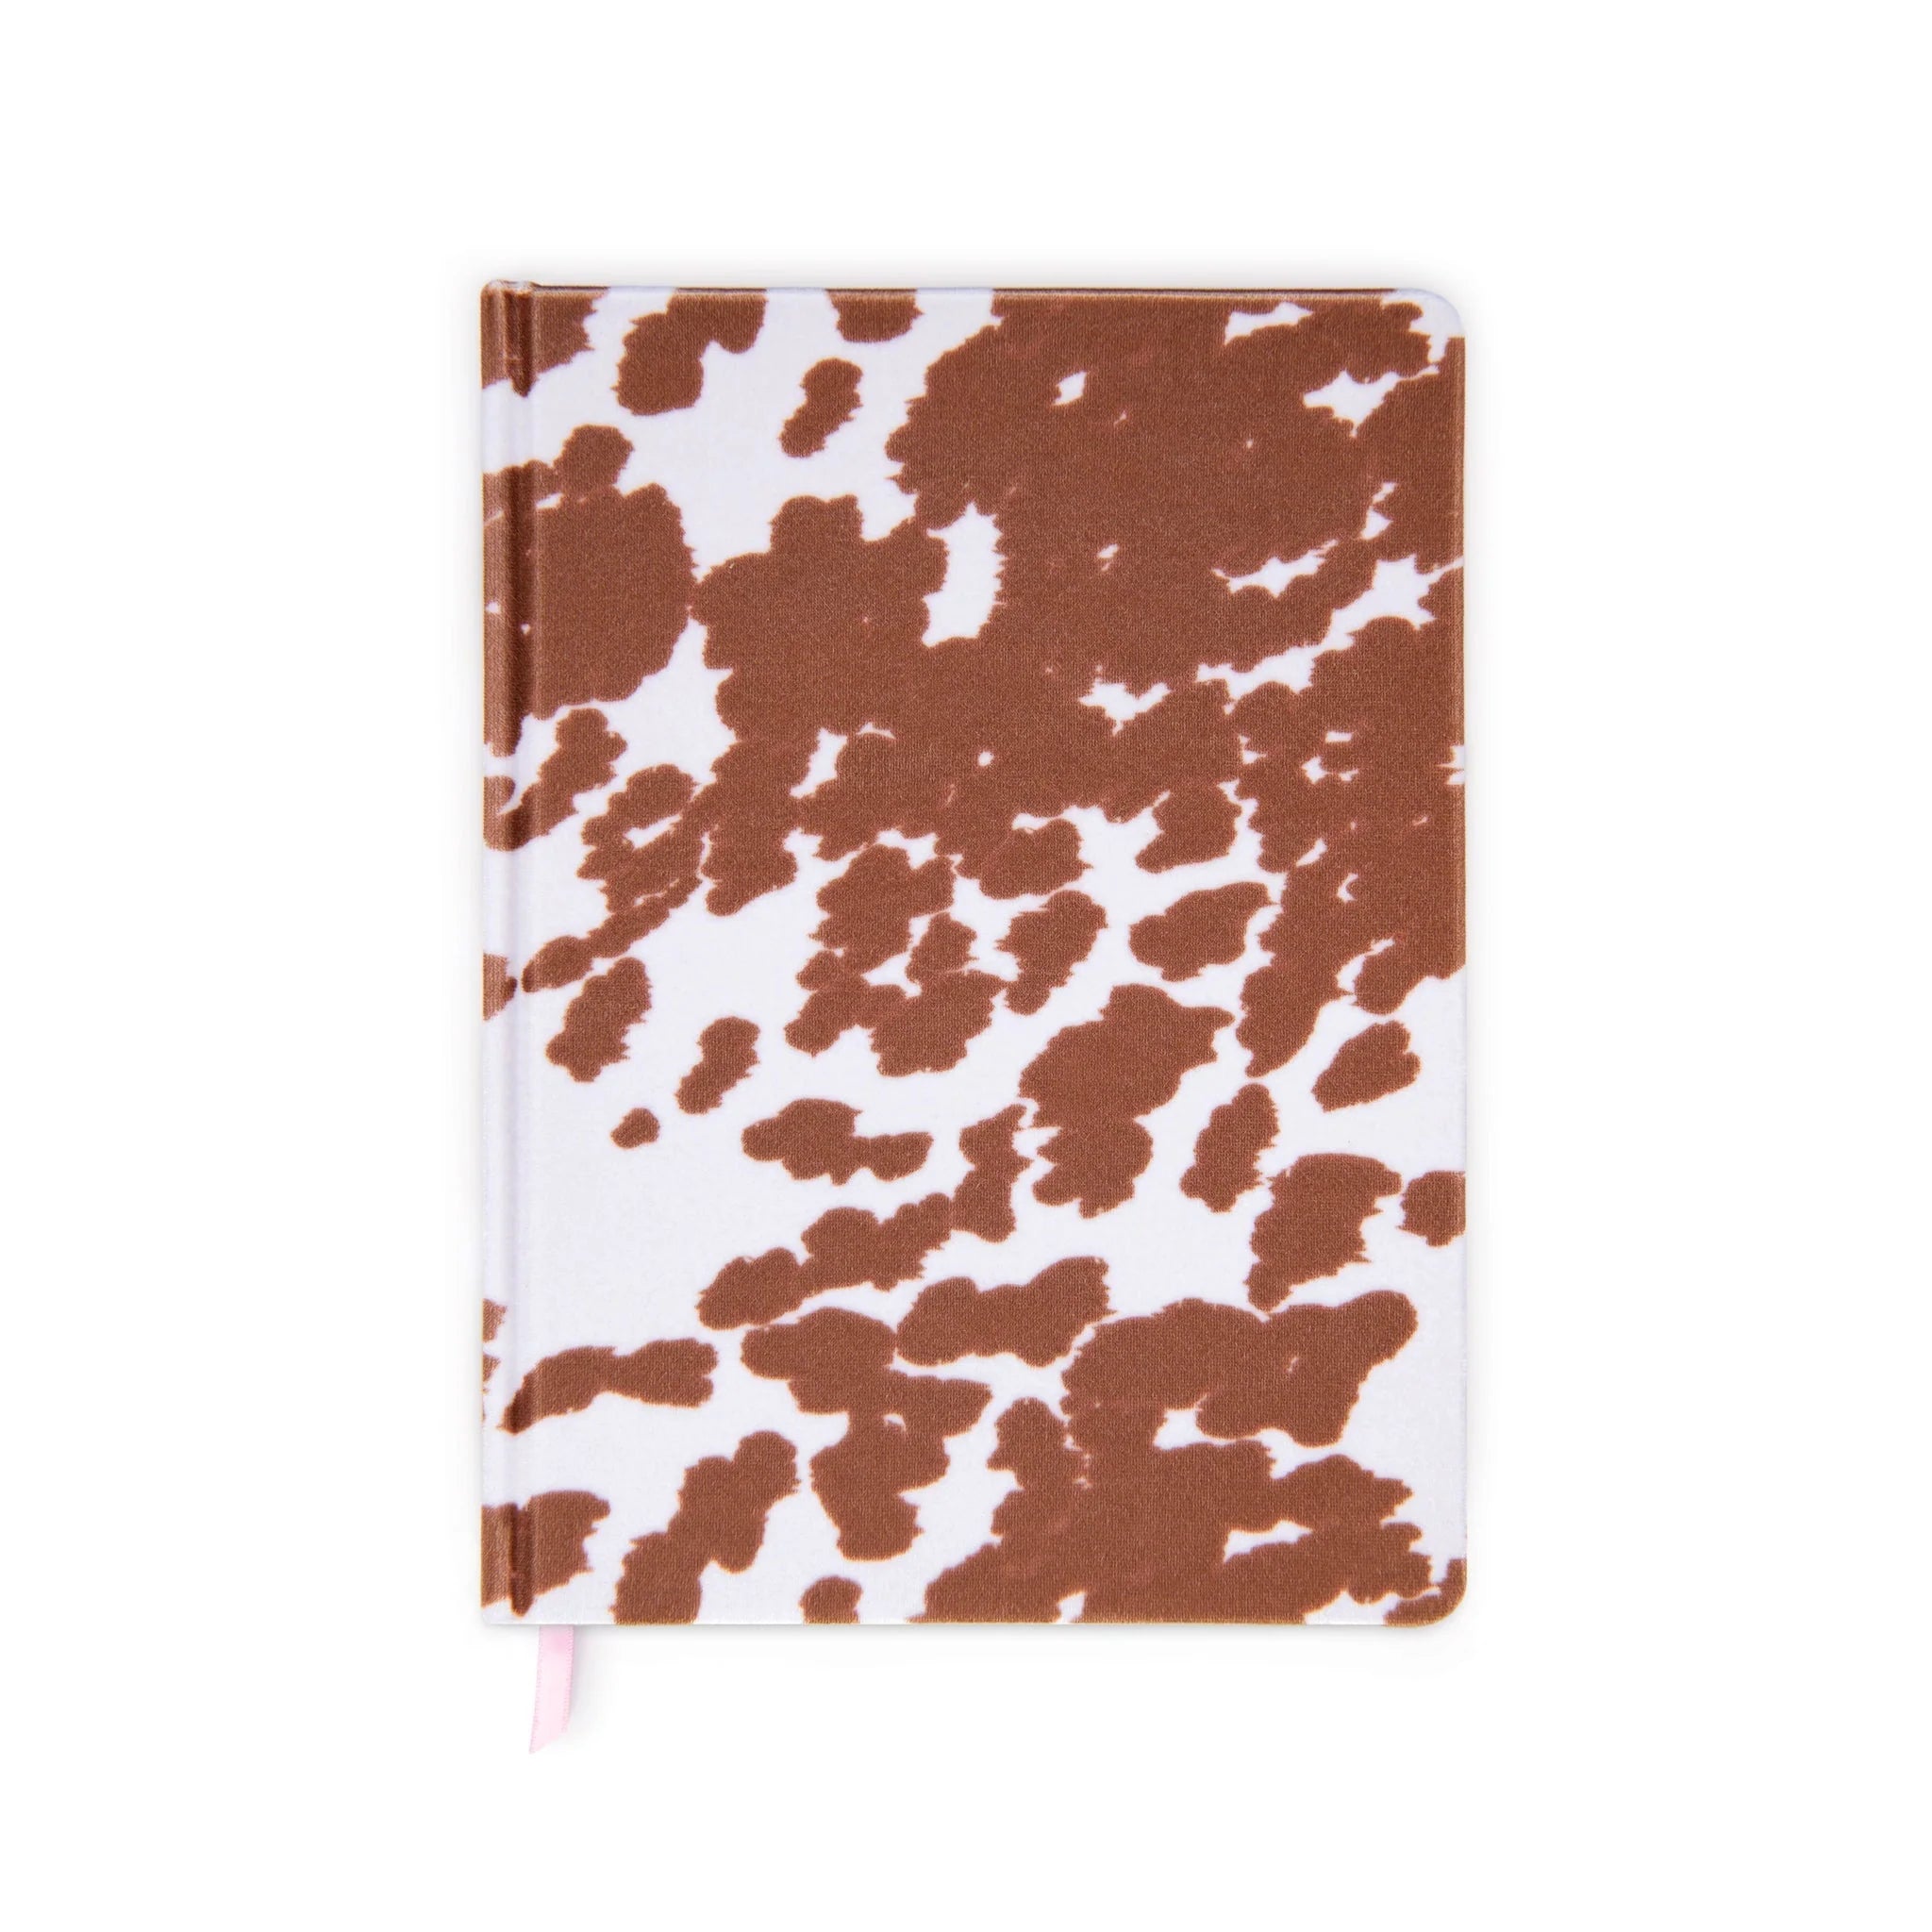 On a white background is a white and brown cow printed journal. 